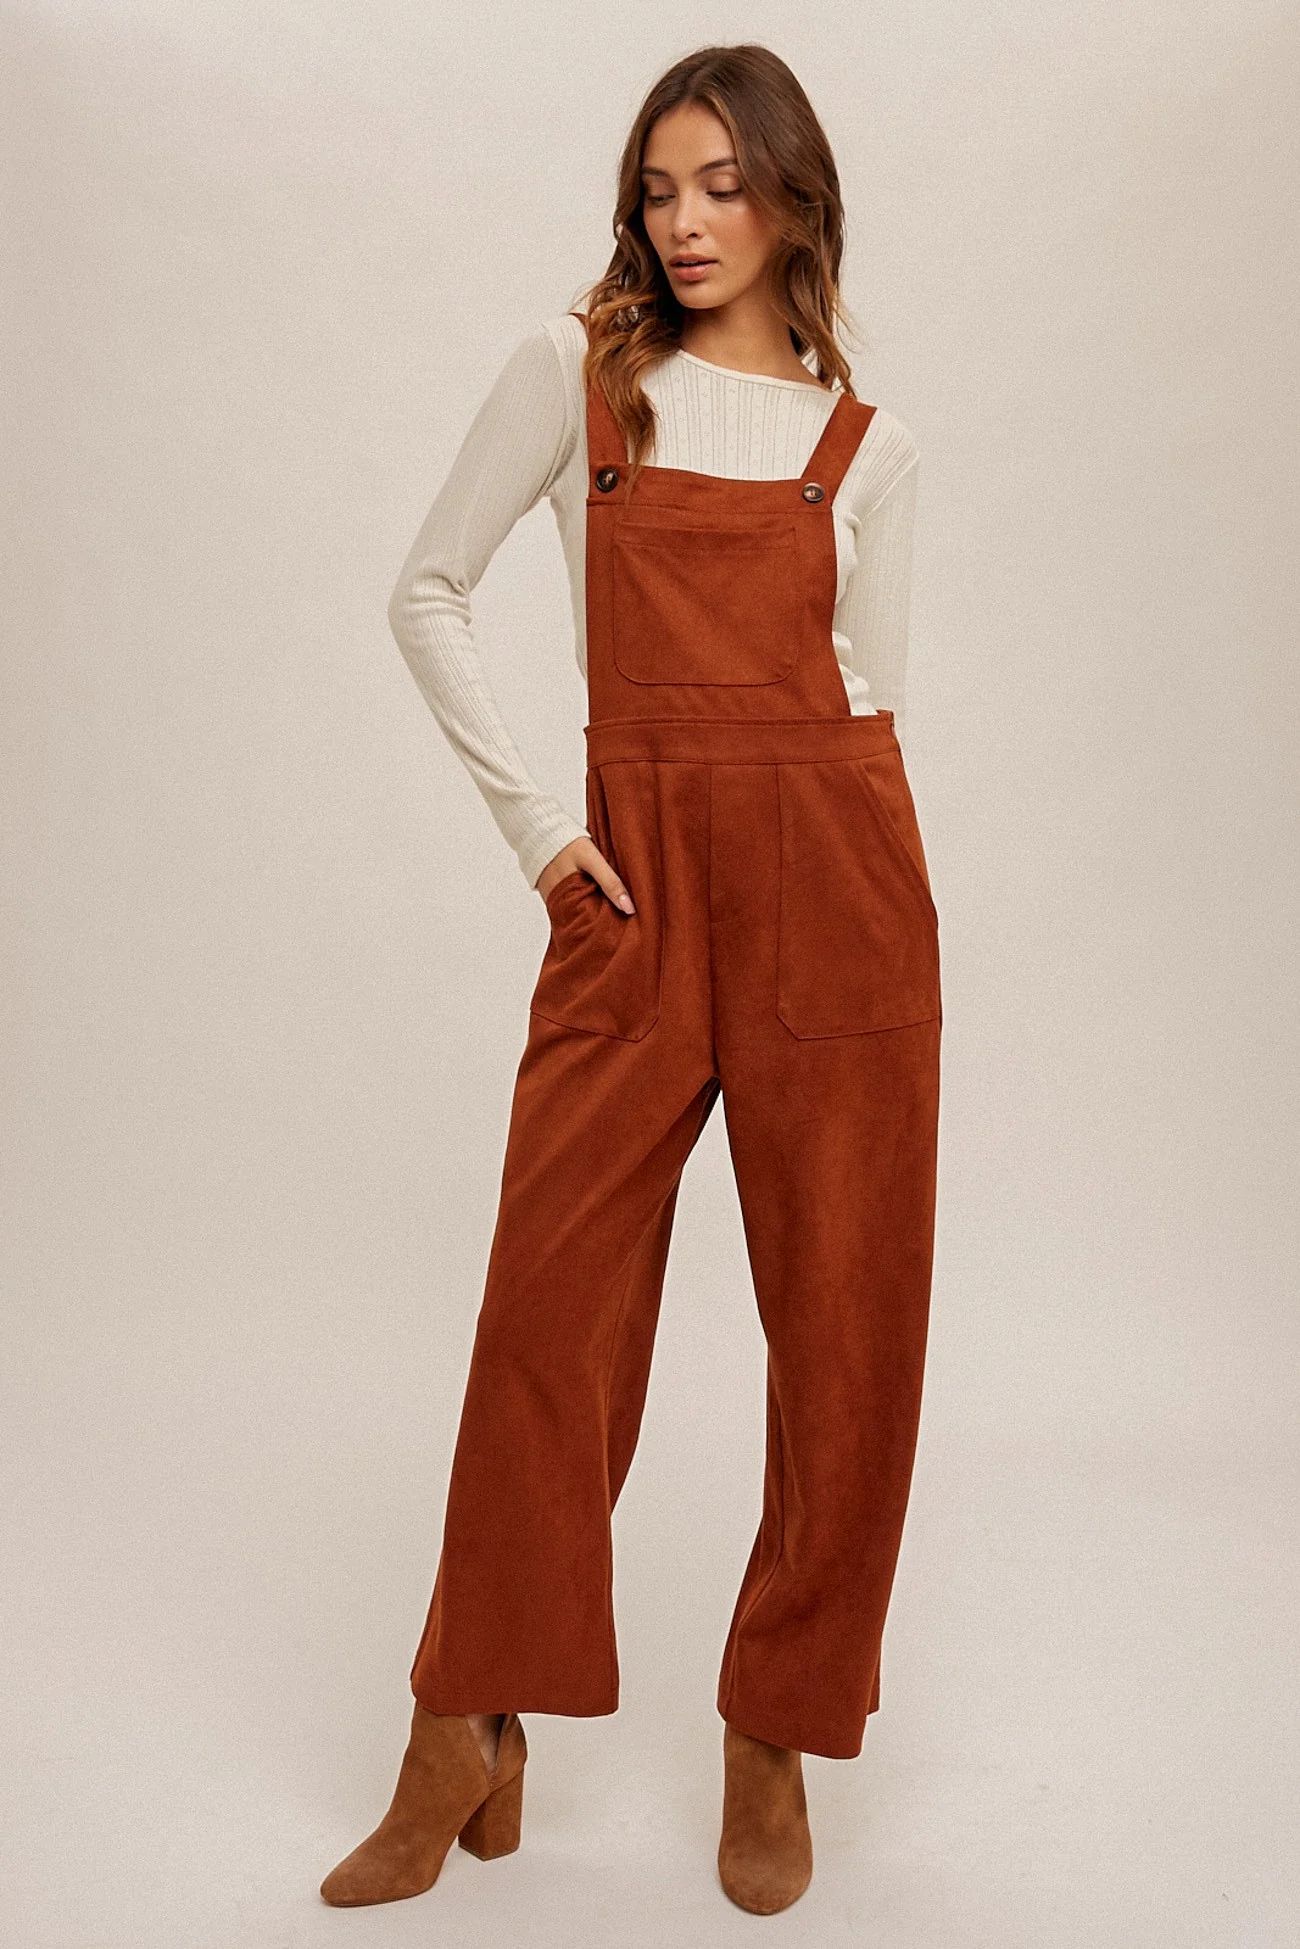 Rust Twill Suede Overall With Side Zipper | PinkBlush Maternity